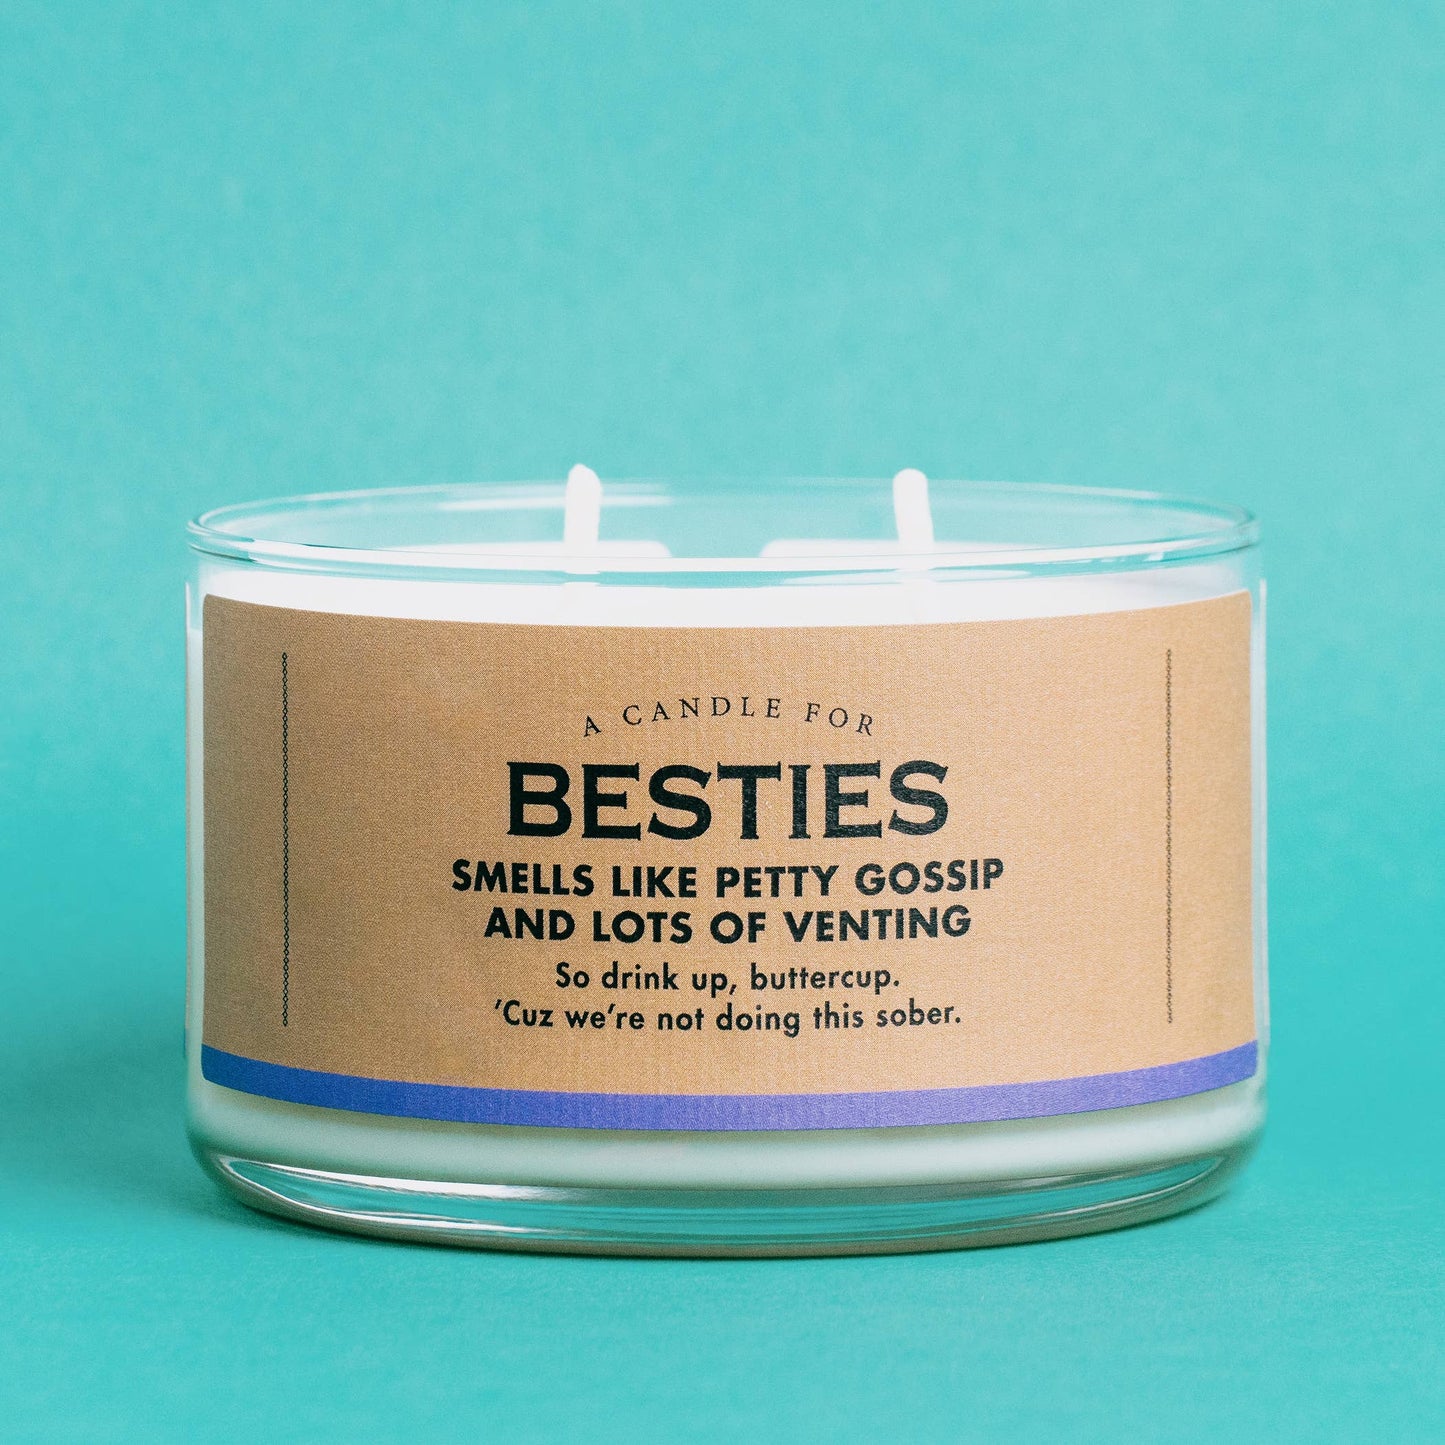 Whiskey River Soap Co. - A Candle for Besties | Funny Candle